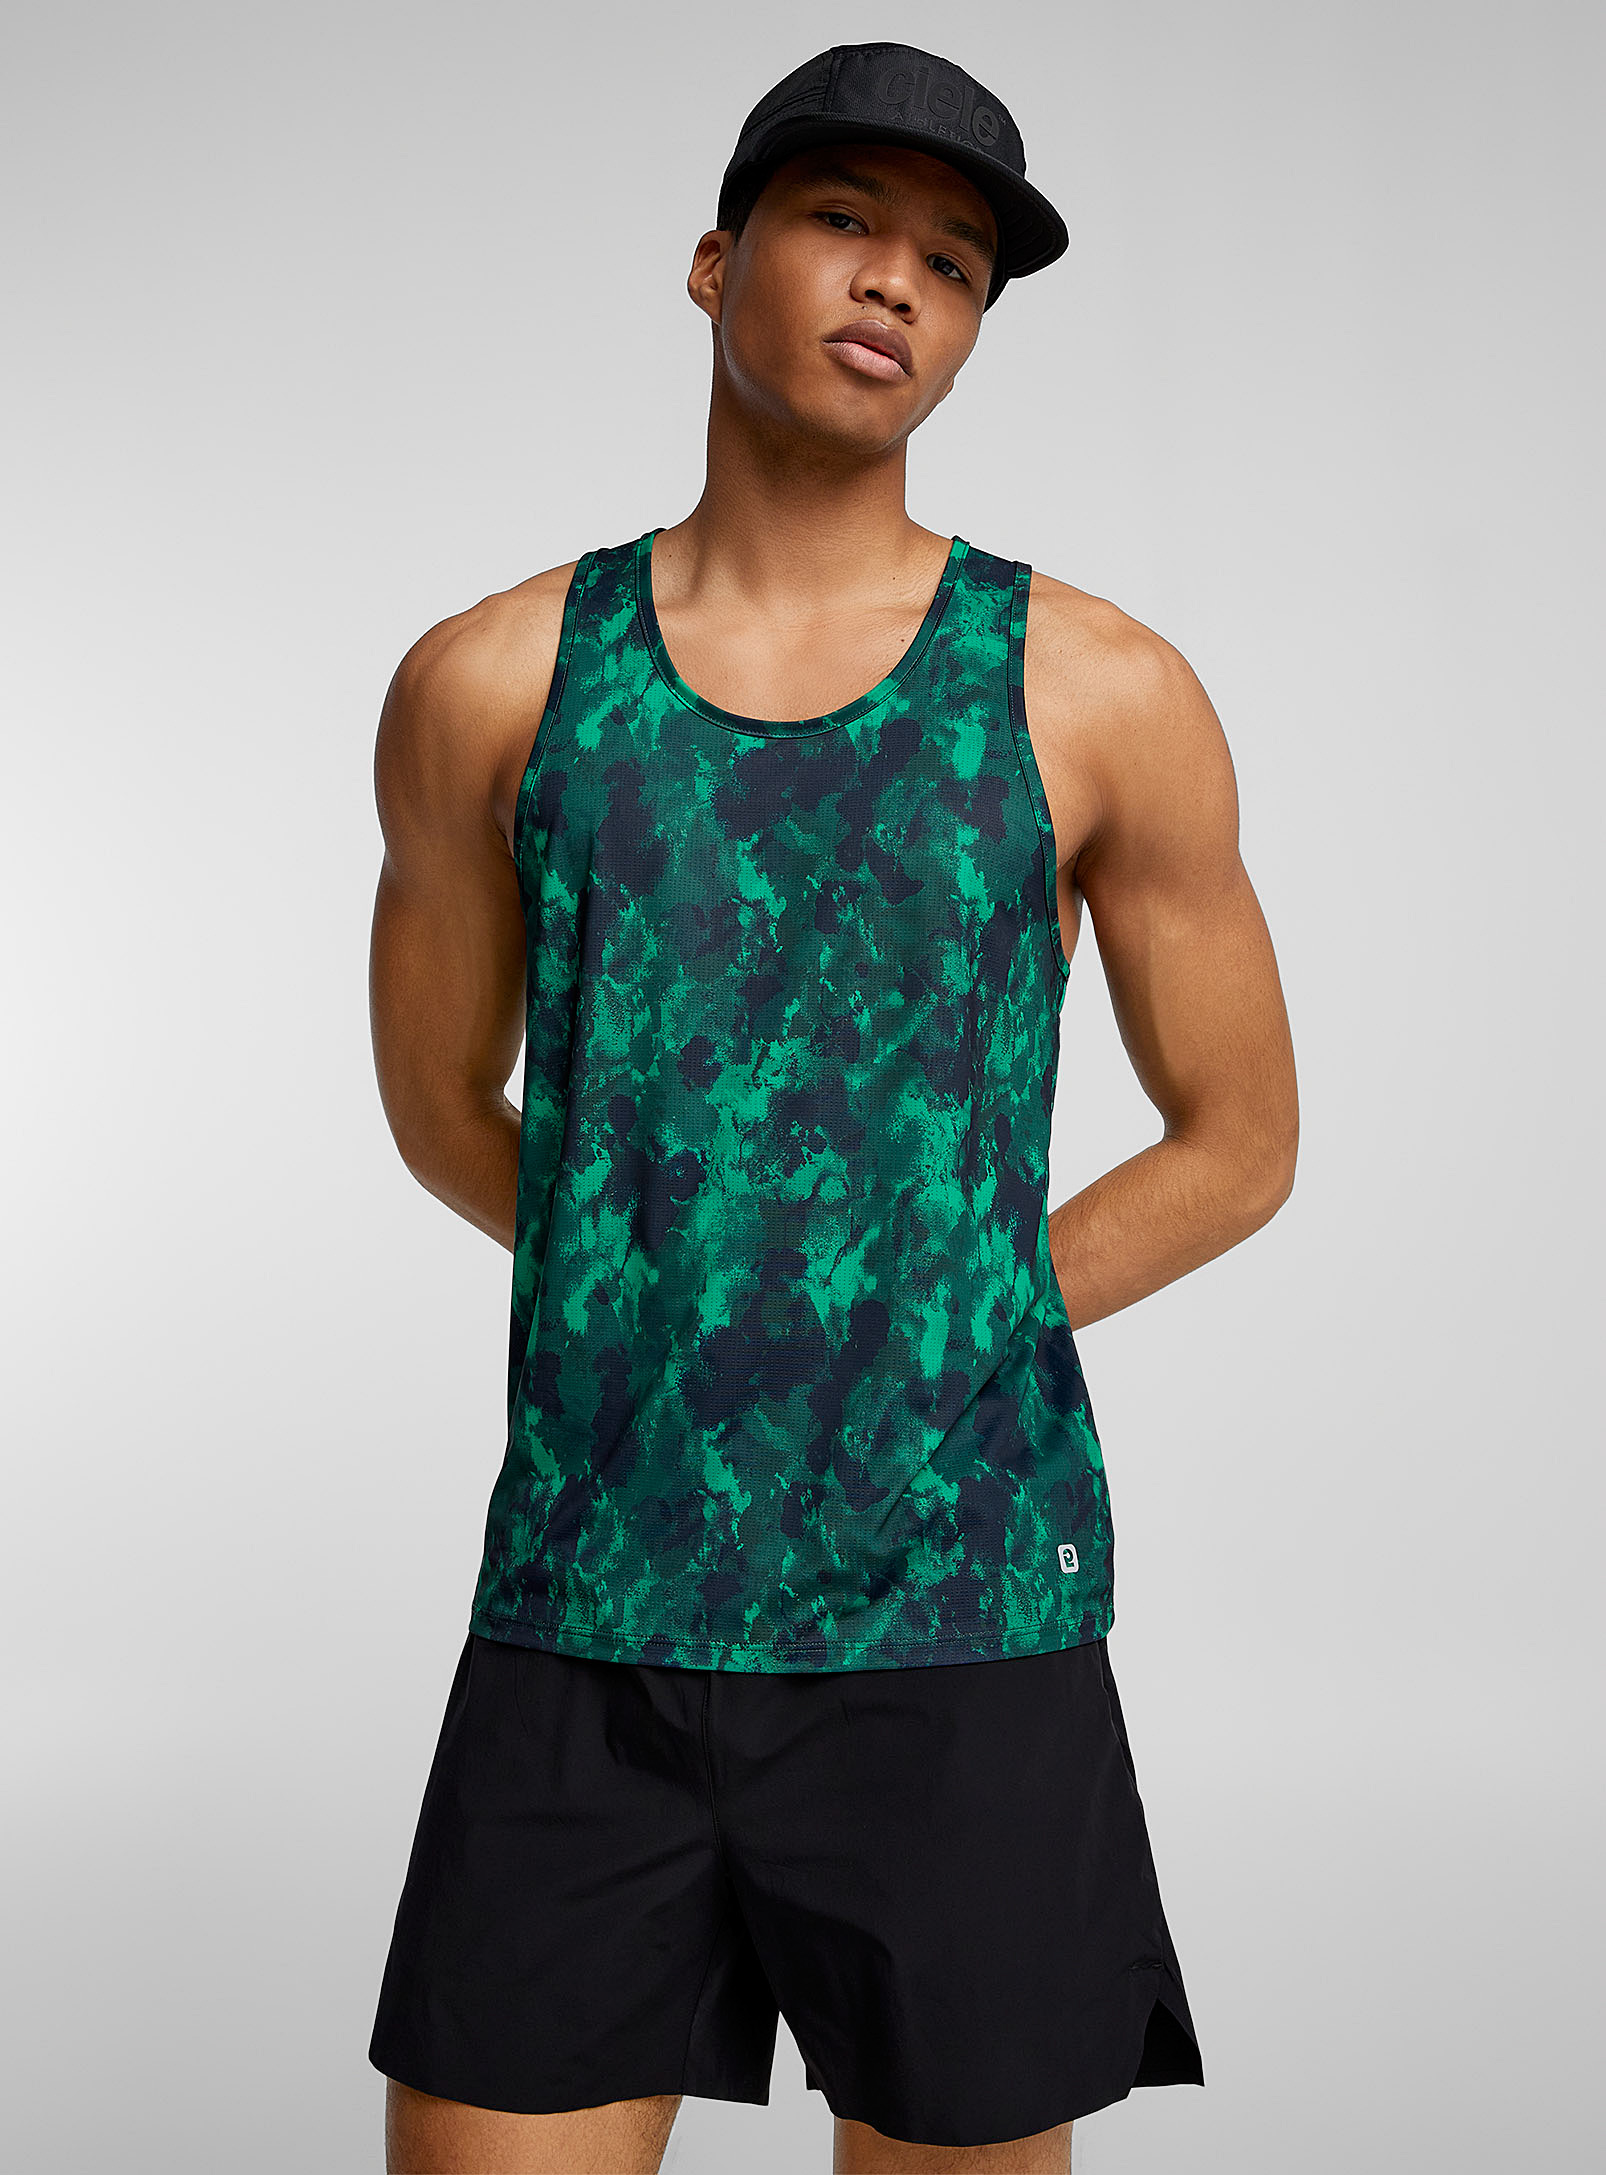 I.fiv5 Low Armhole Micro-perforated Printed Tank In Patterned Green